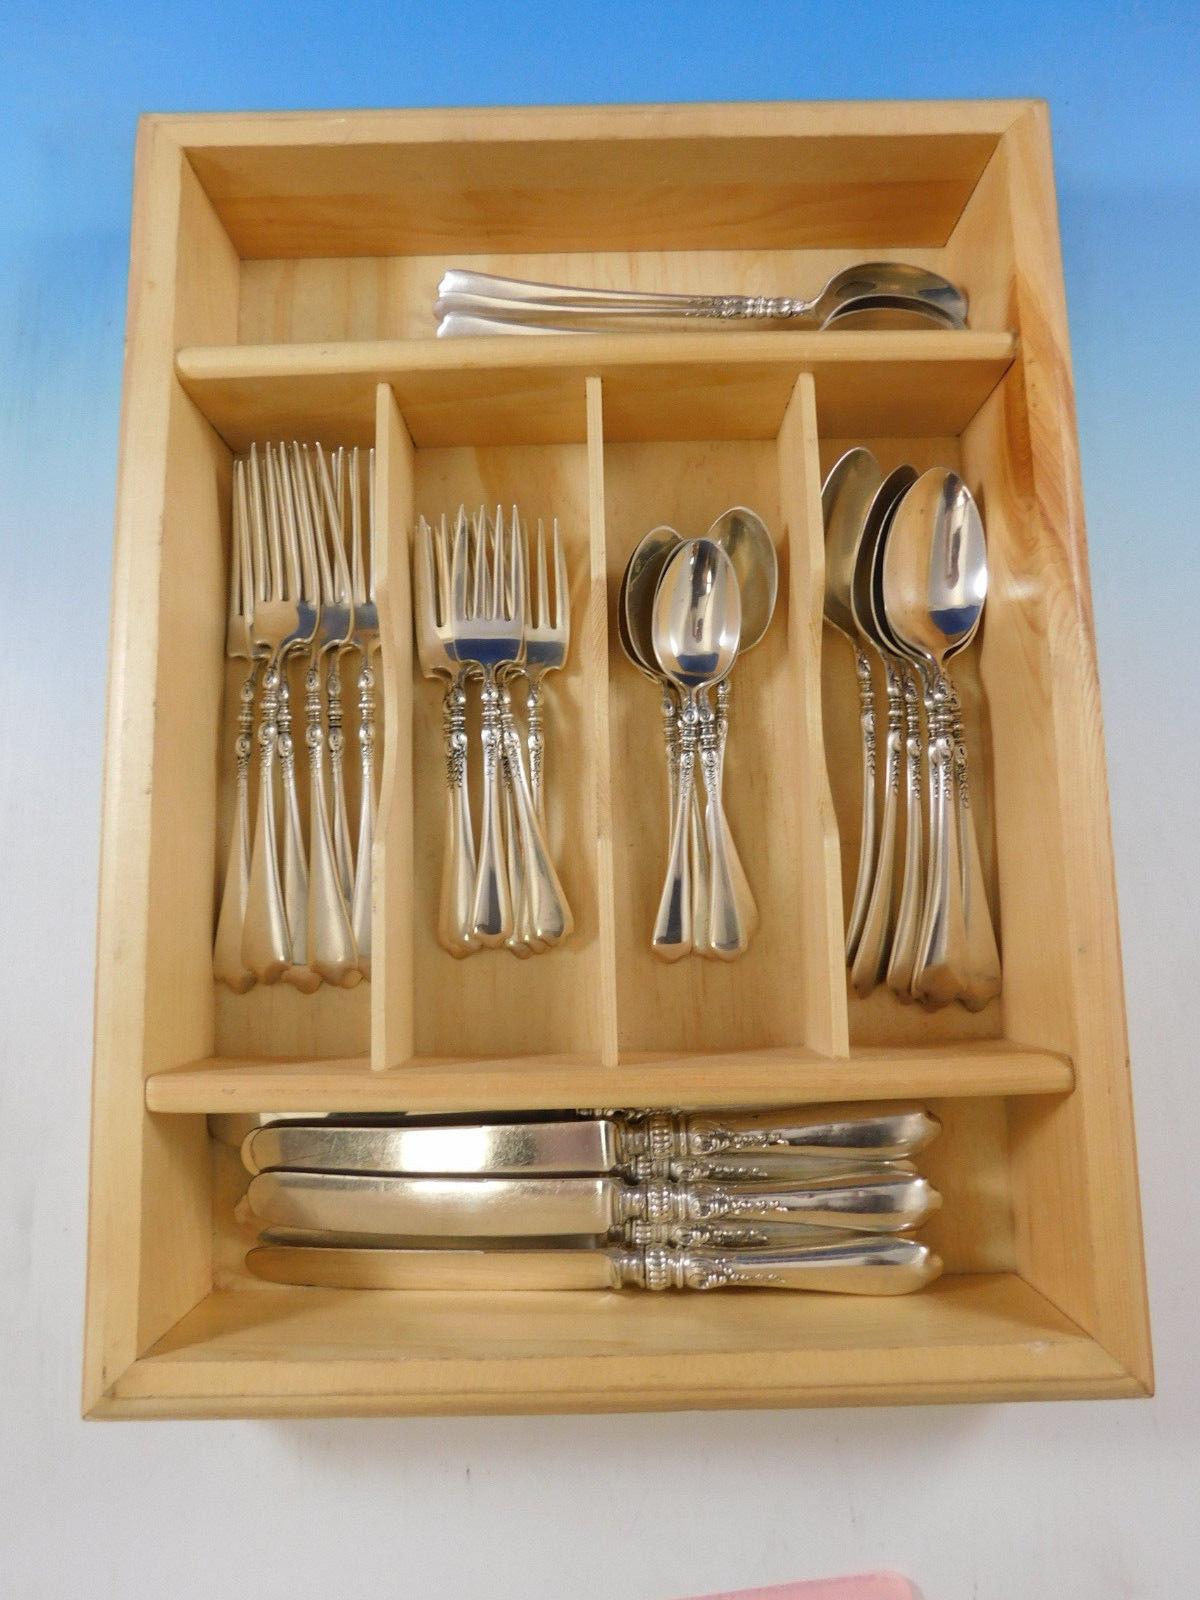 Nellie Custis by Lunt sterling silver flatware set, 36 pieces. Great starter set! This set includes:

Six knives, fancy handles with extra design, 8 3/4